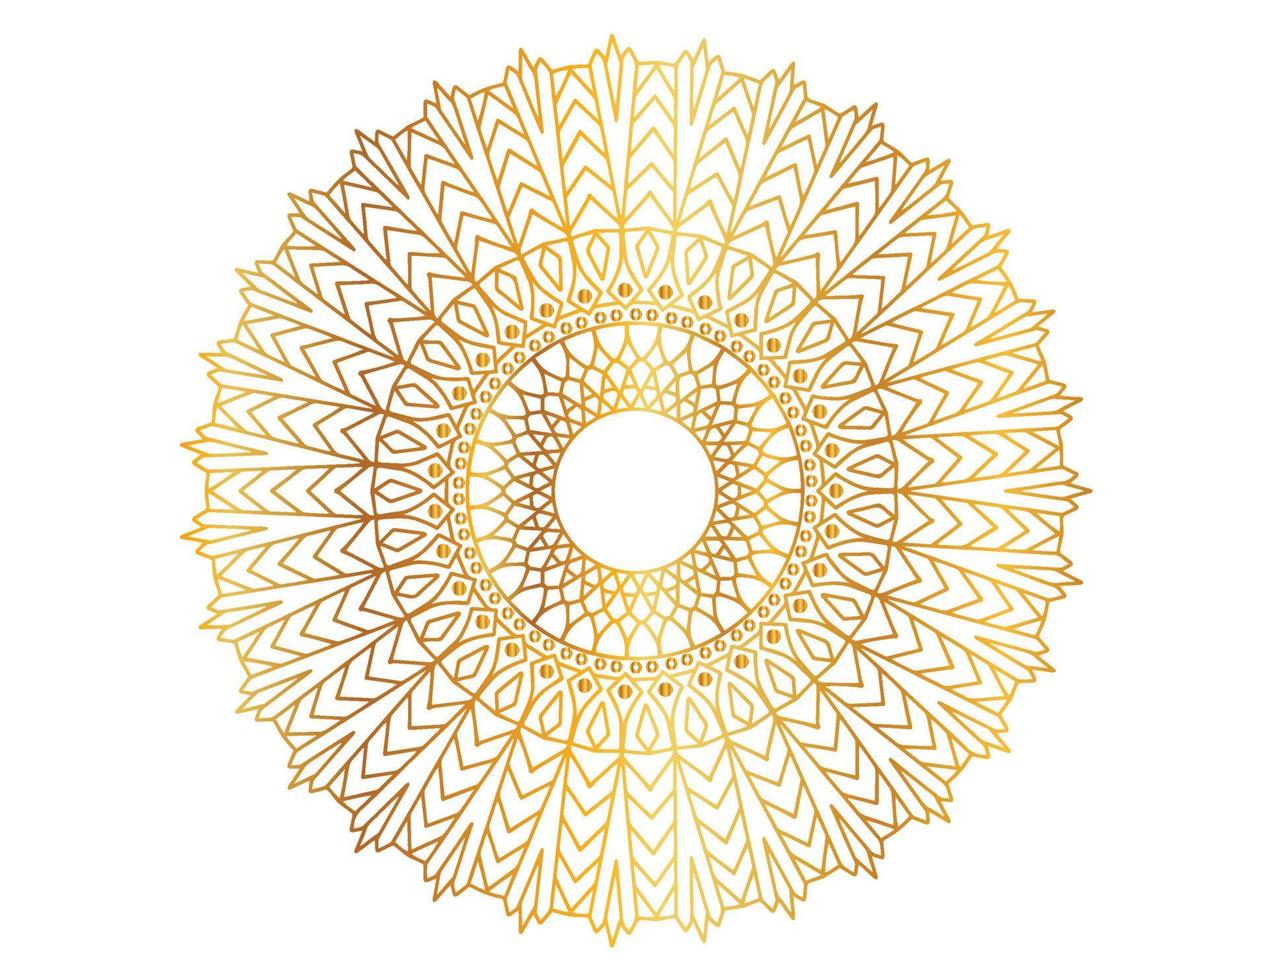 Mandala art with golden gradient and pattern vector